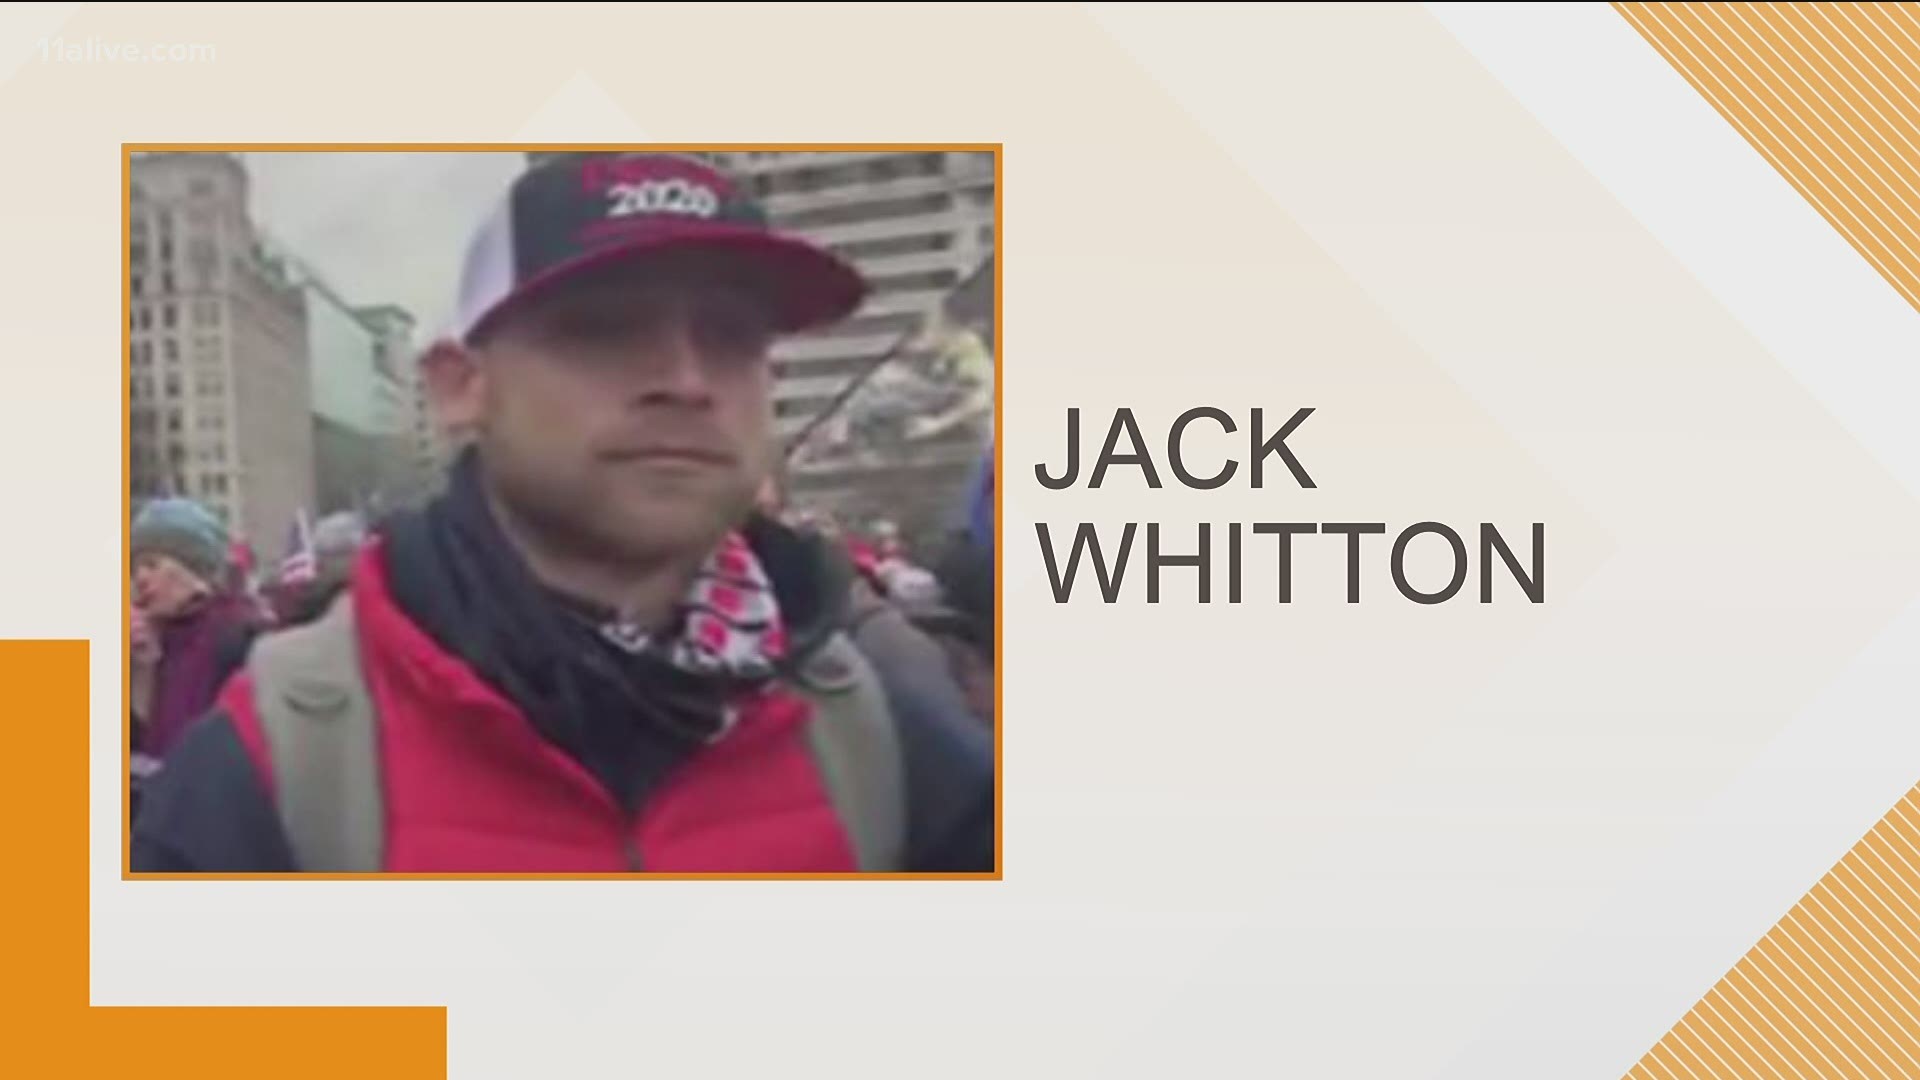 Jack Whitton is from Locust Grove in Henry County.